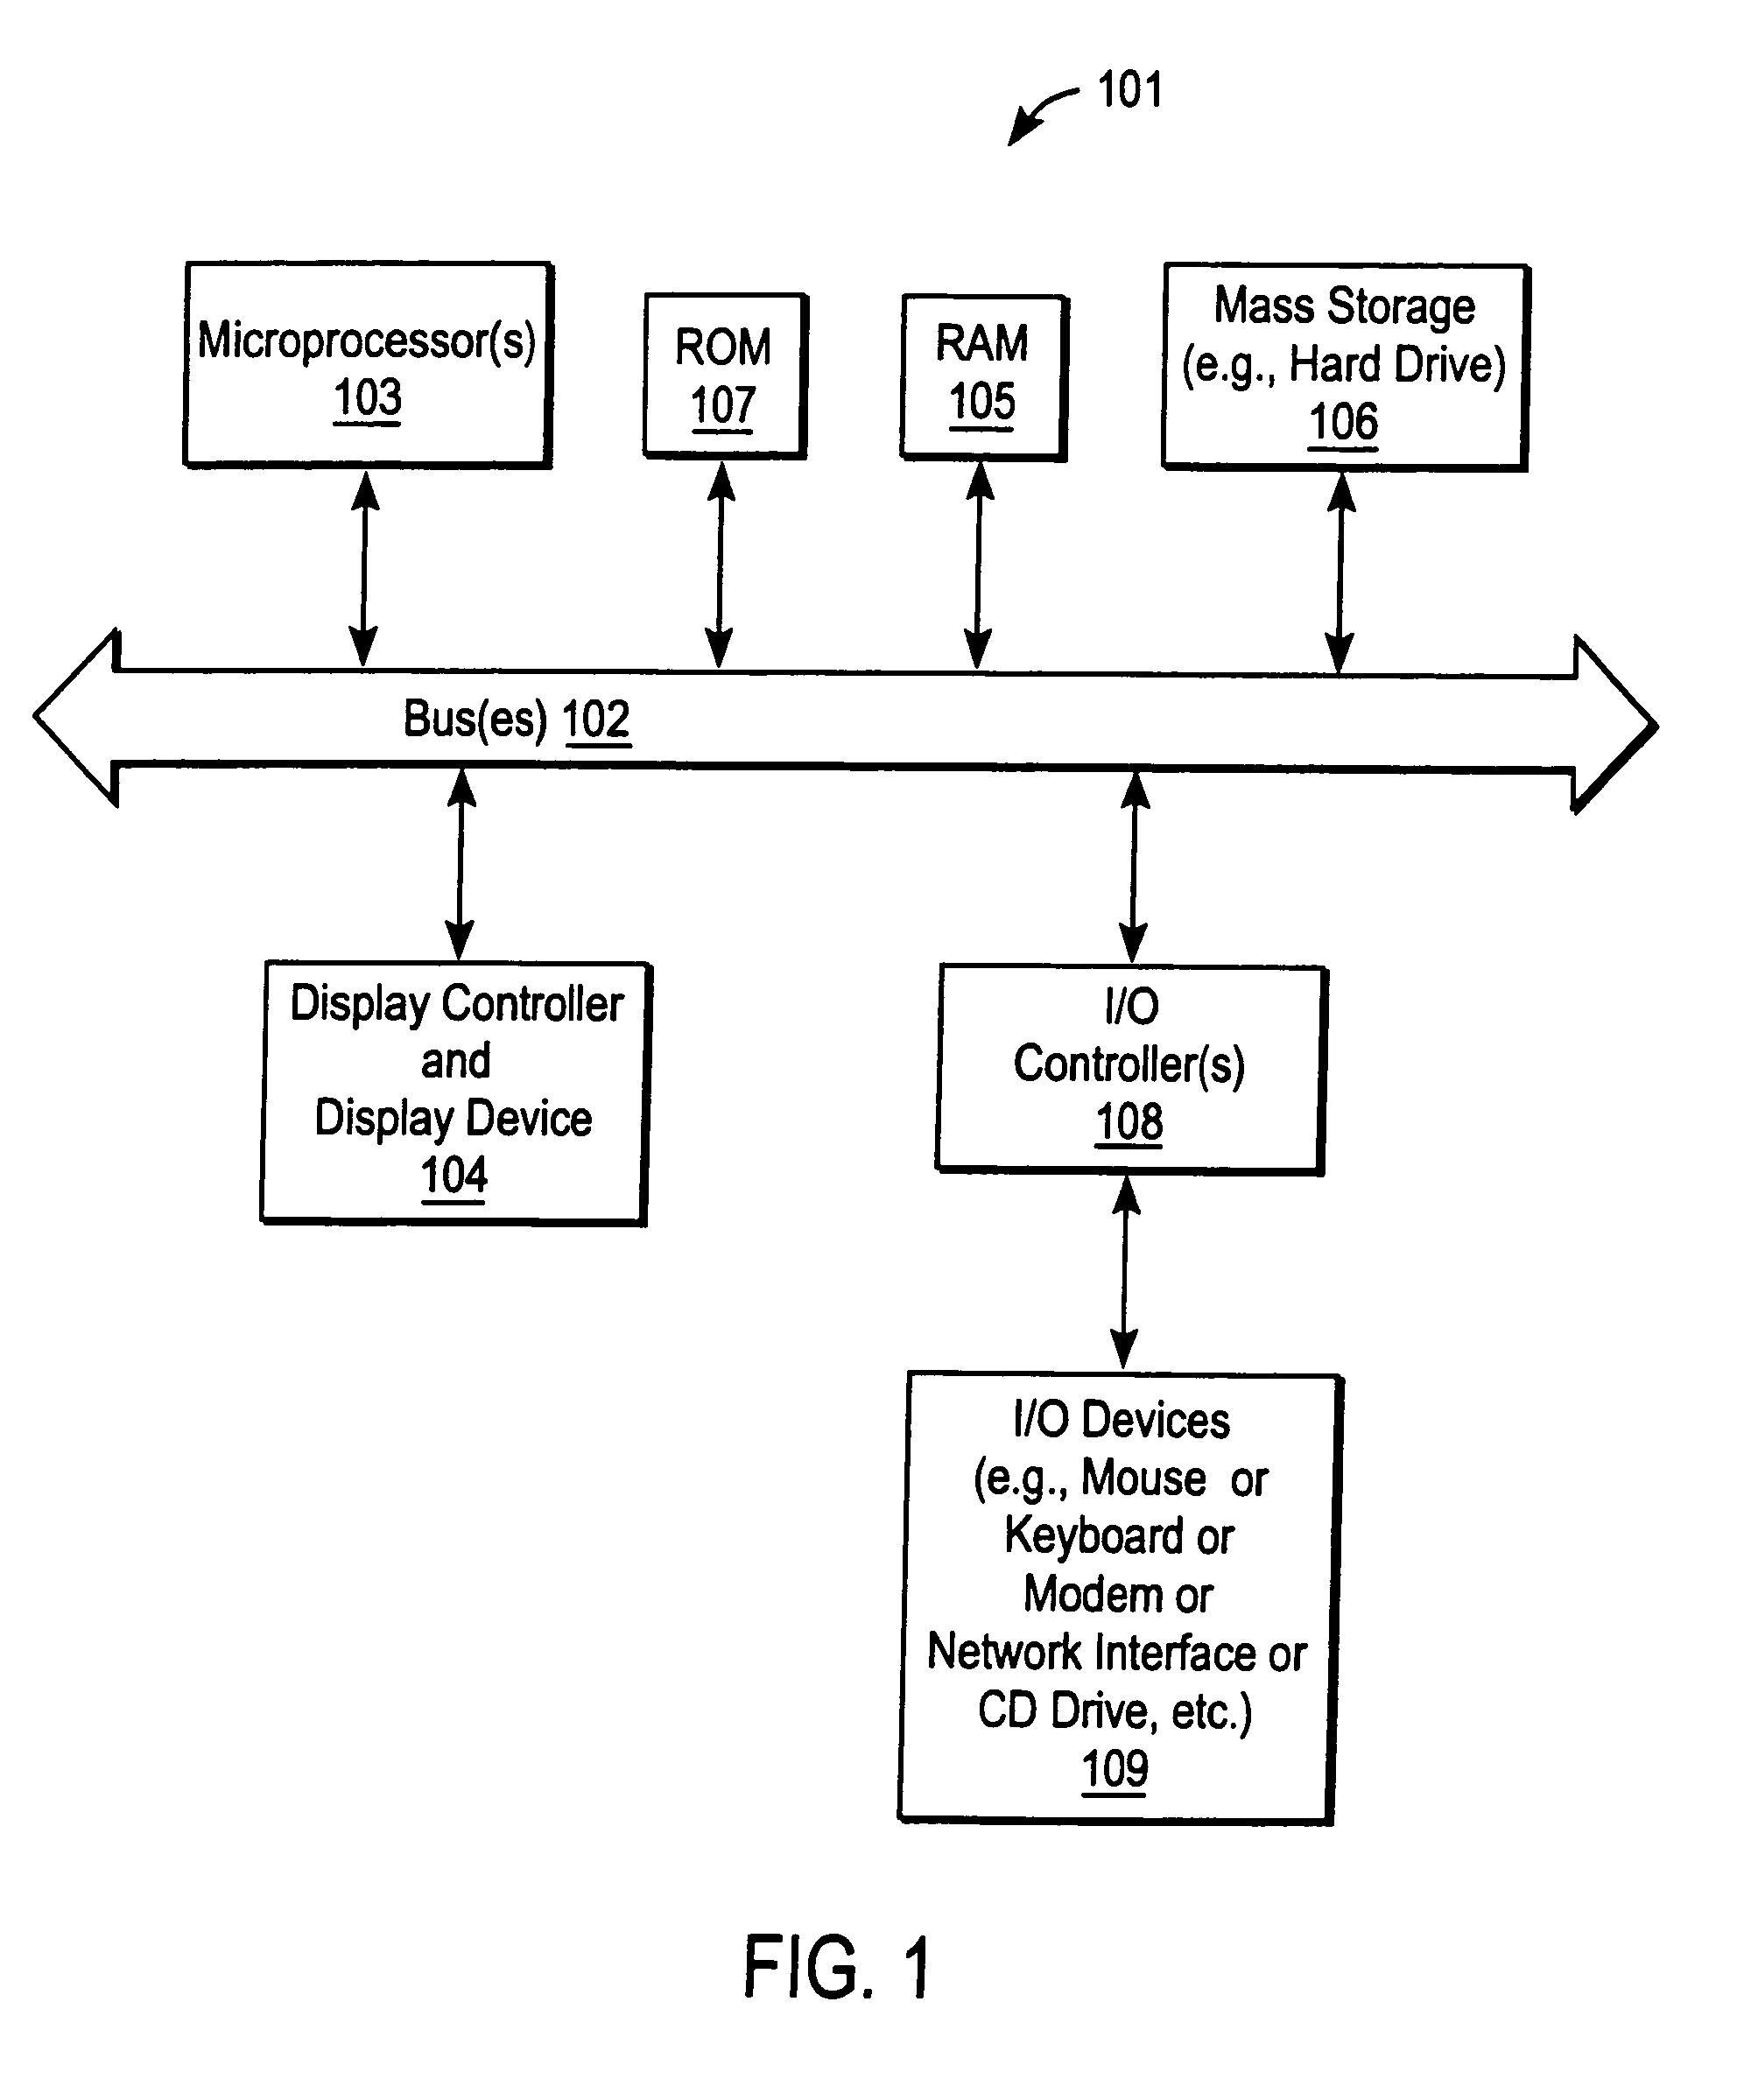 Methods and systems for managing data